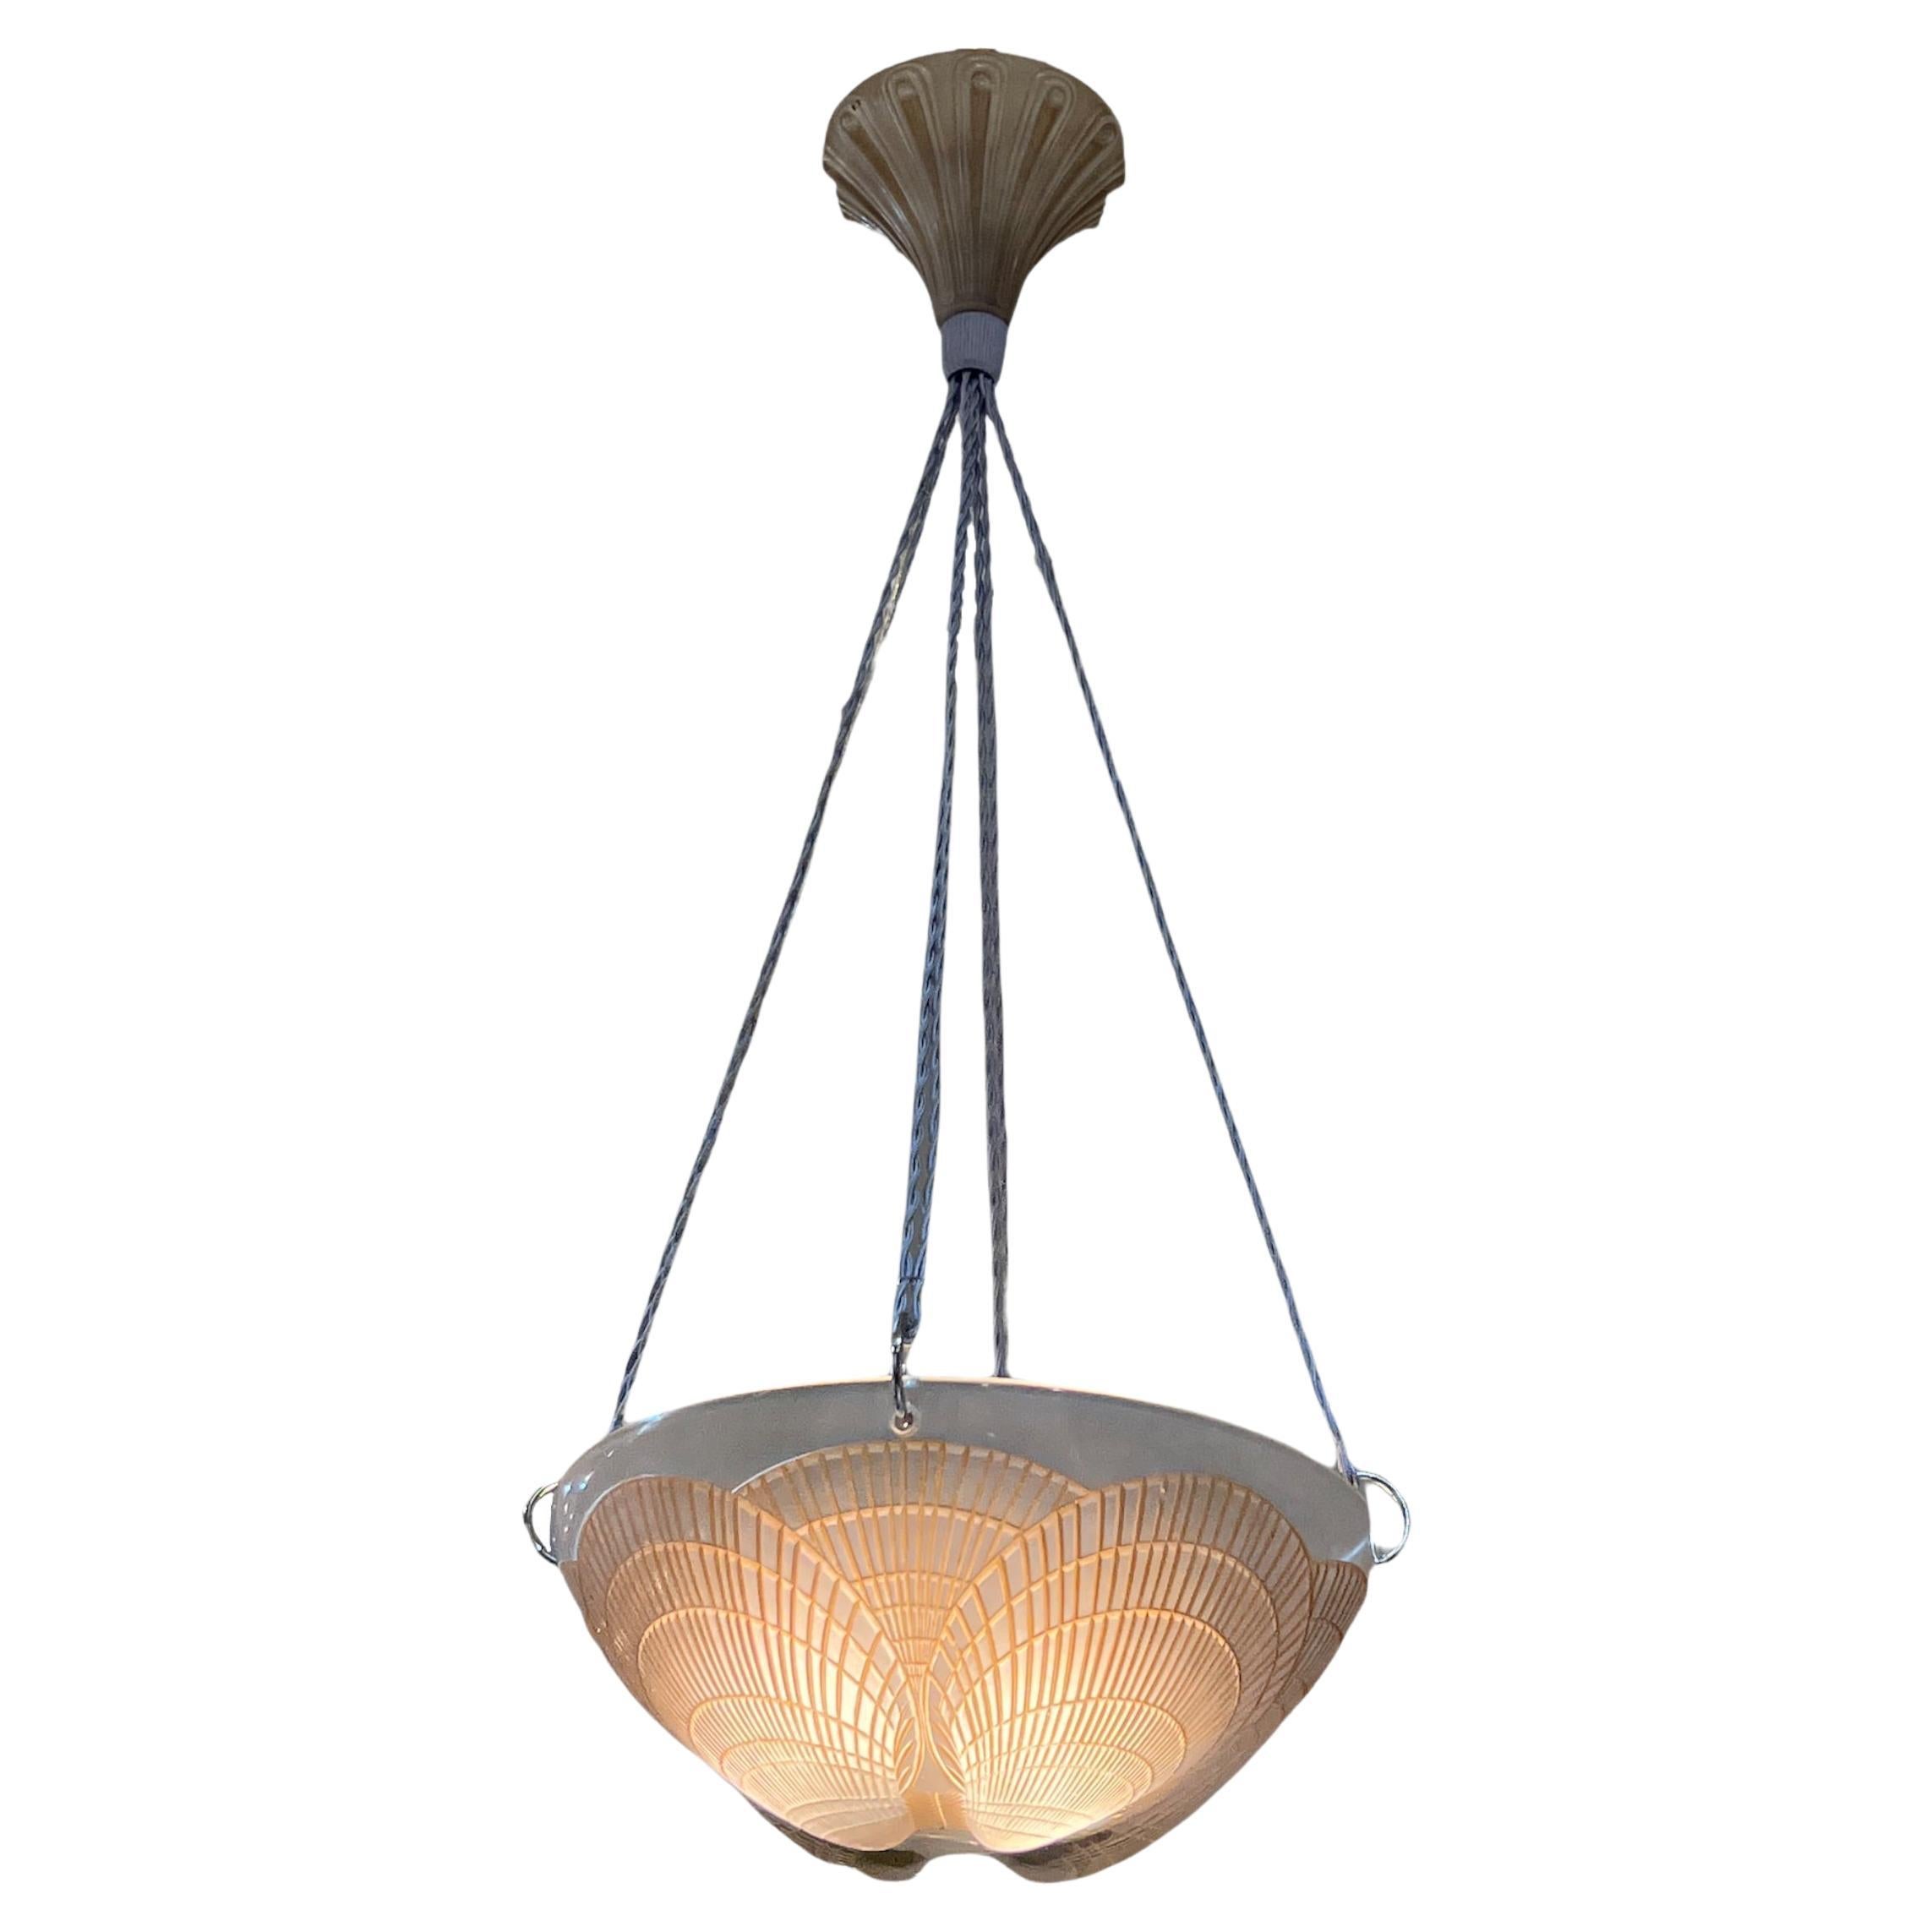 1921 René Lalique Coquilles Ceiling Light Chandelier Glass with Sepia Patina